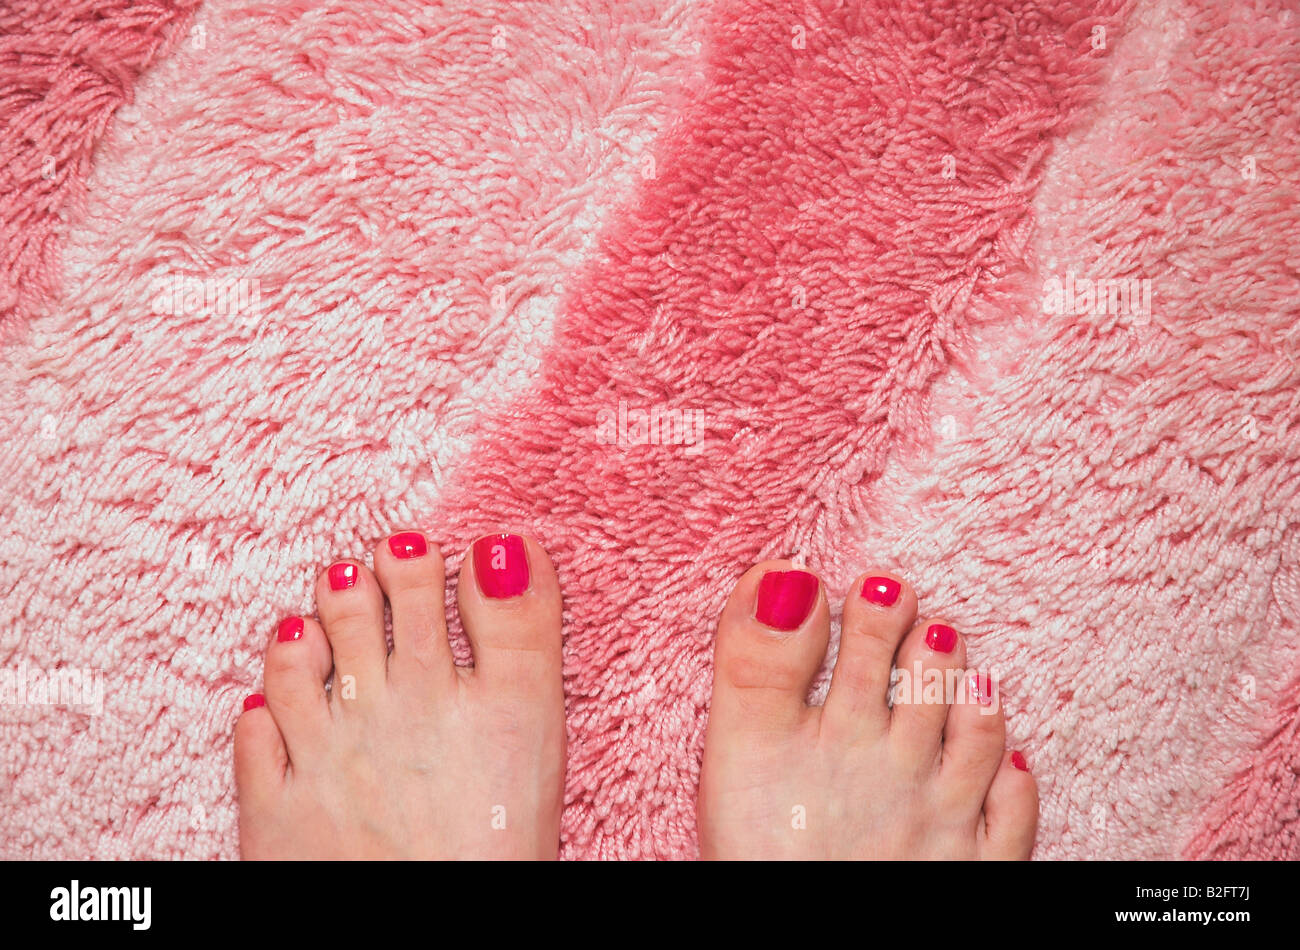 Picket Vær forsigtig stille Young woman with red painted toes standing on bathroom rug Stock Photo -  Alamy